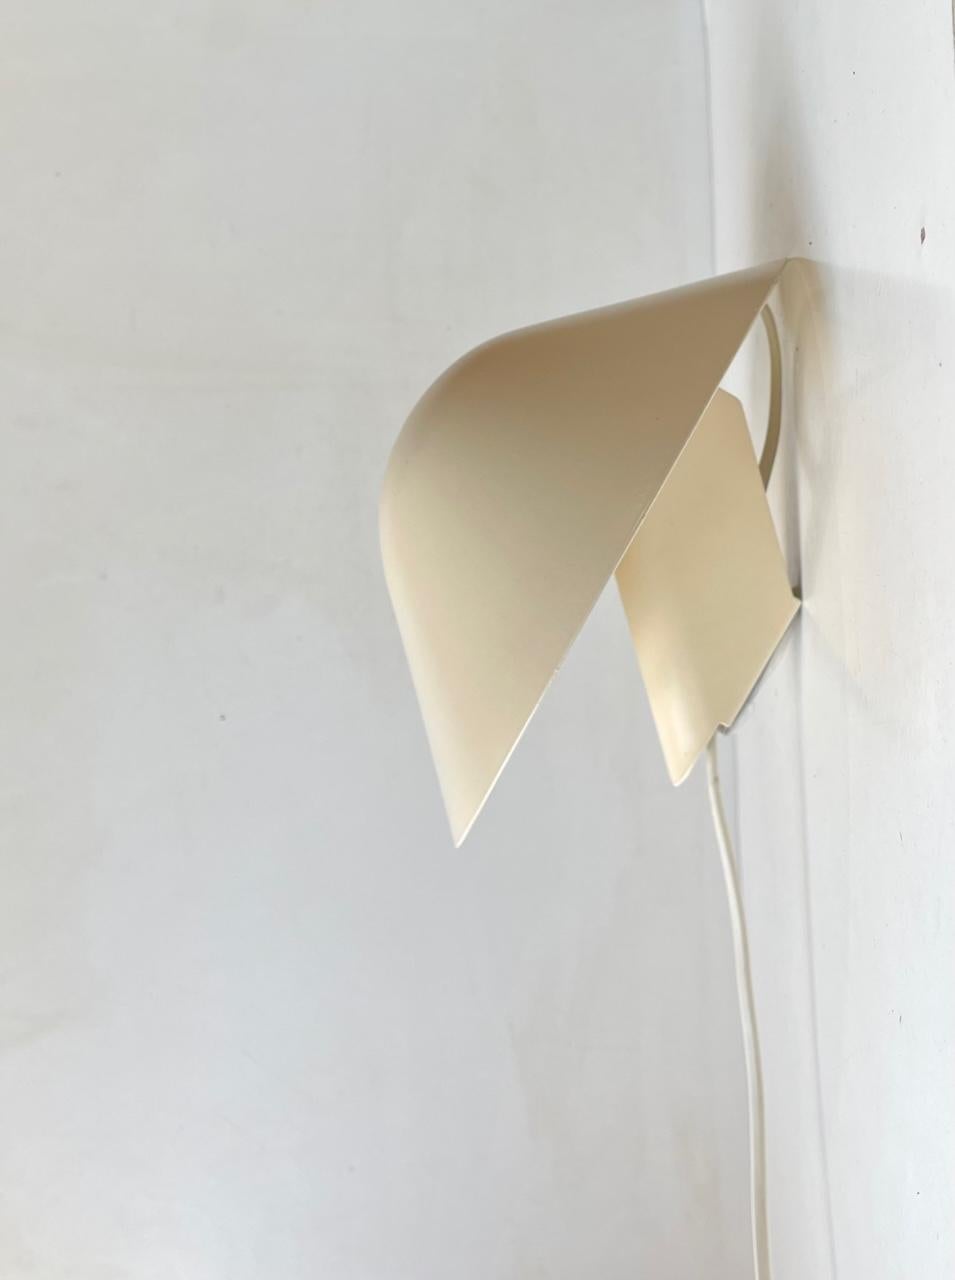 Off-white creamy version of the Zephyr wall light made by Lyfa/Lyskær in Denmark during the 1980s. Very similar design to Poul Henningsen's PH hat. The shade is adjustable up/down and it features an on/of switch to its cord. Measurements: Diameter: